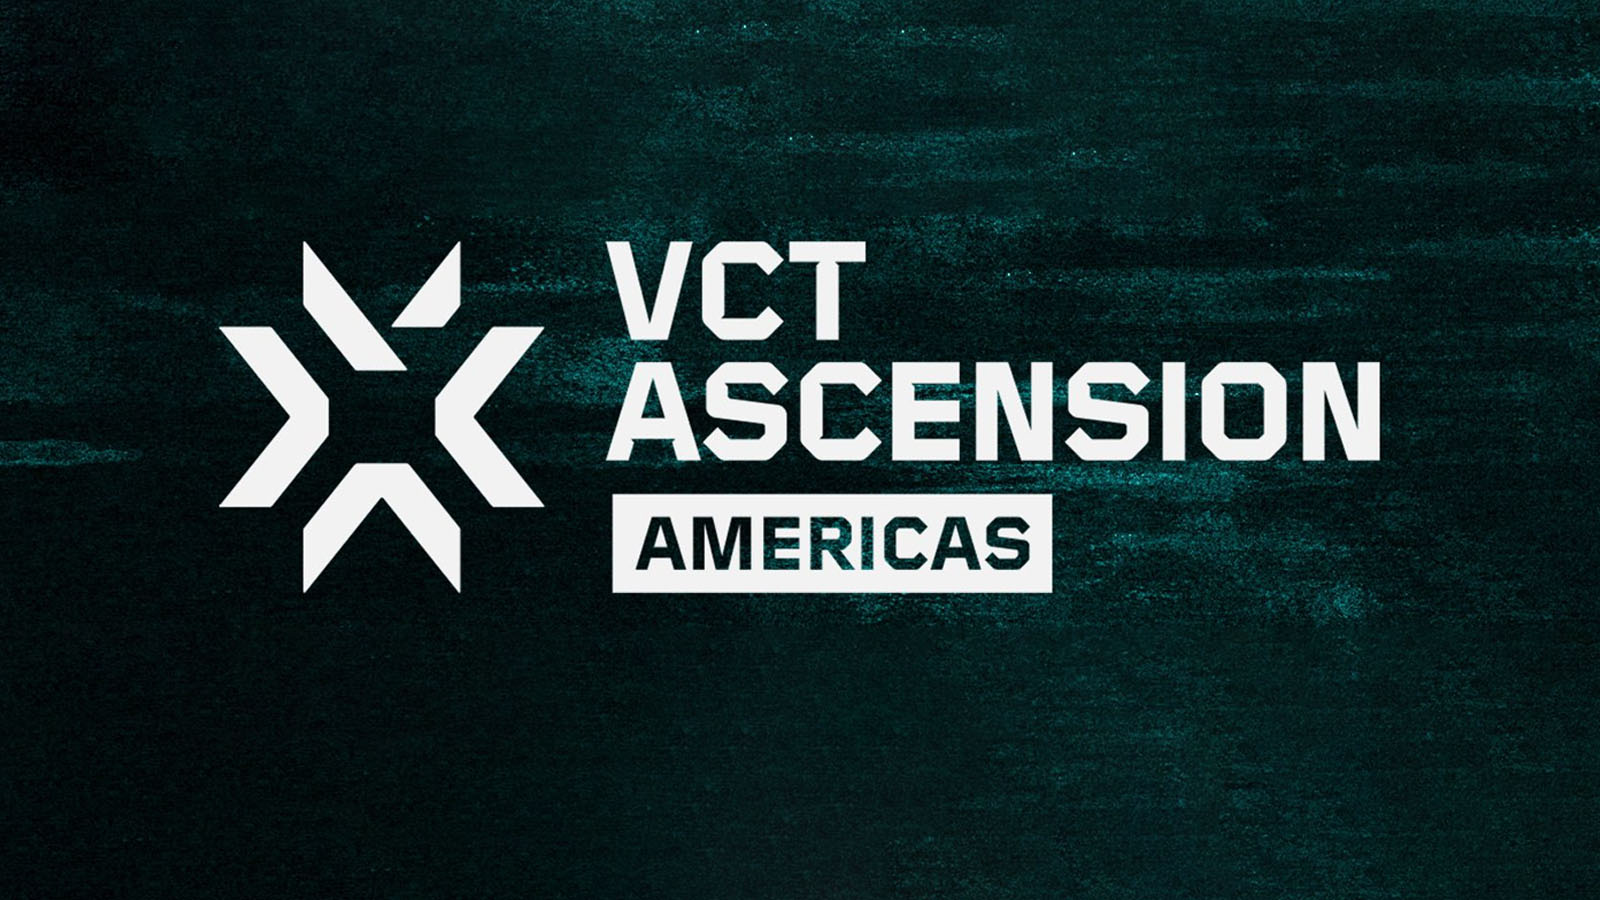 VCT Ascension Americas 2023 tournament to kick off in Brazil TrendRadars